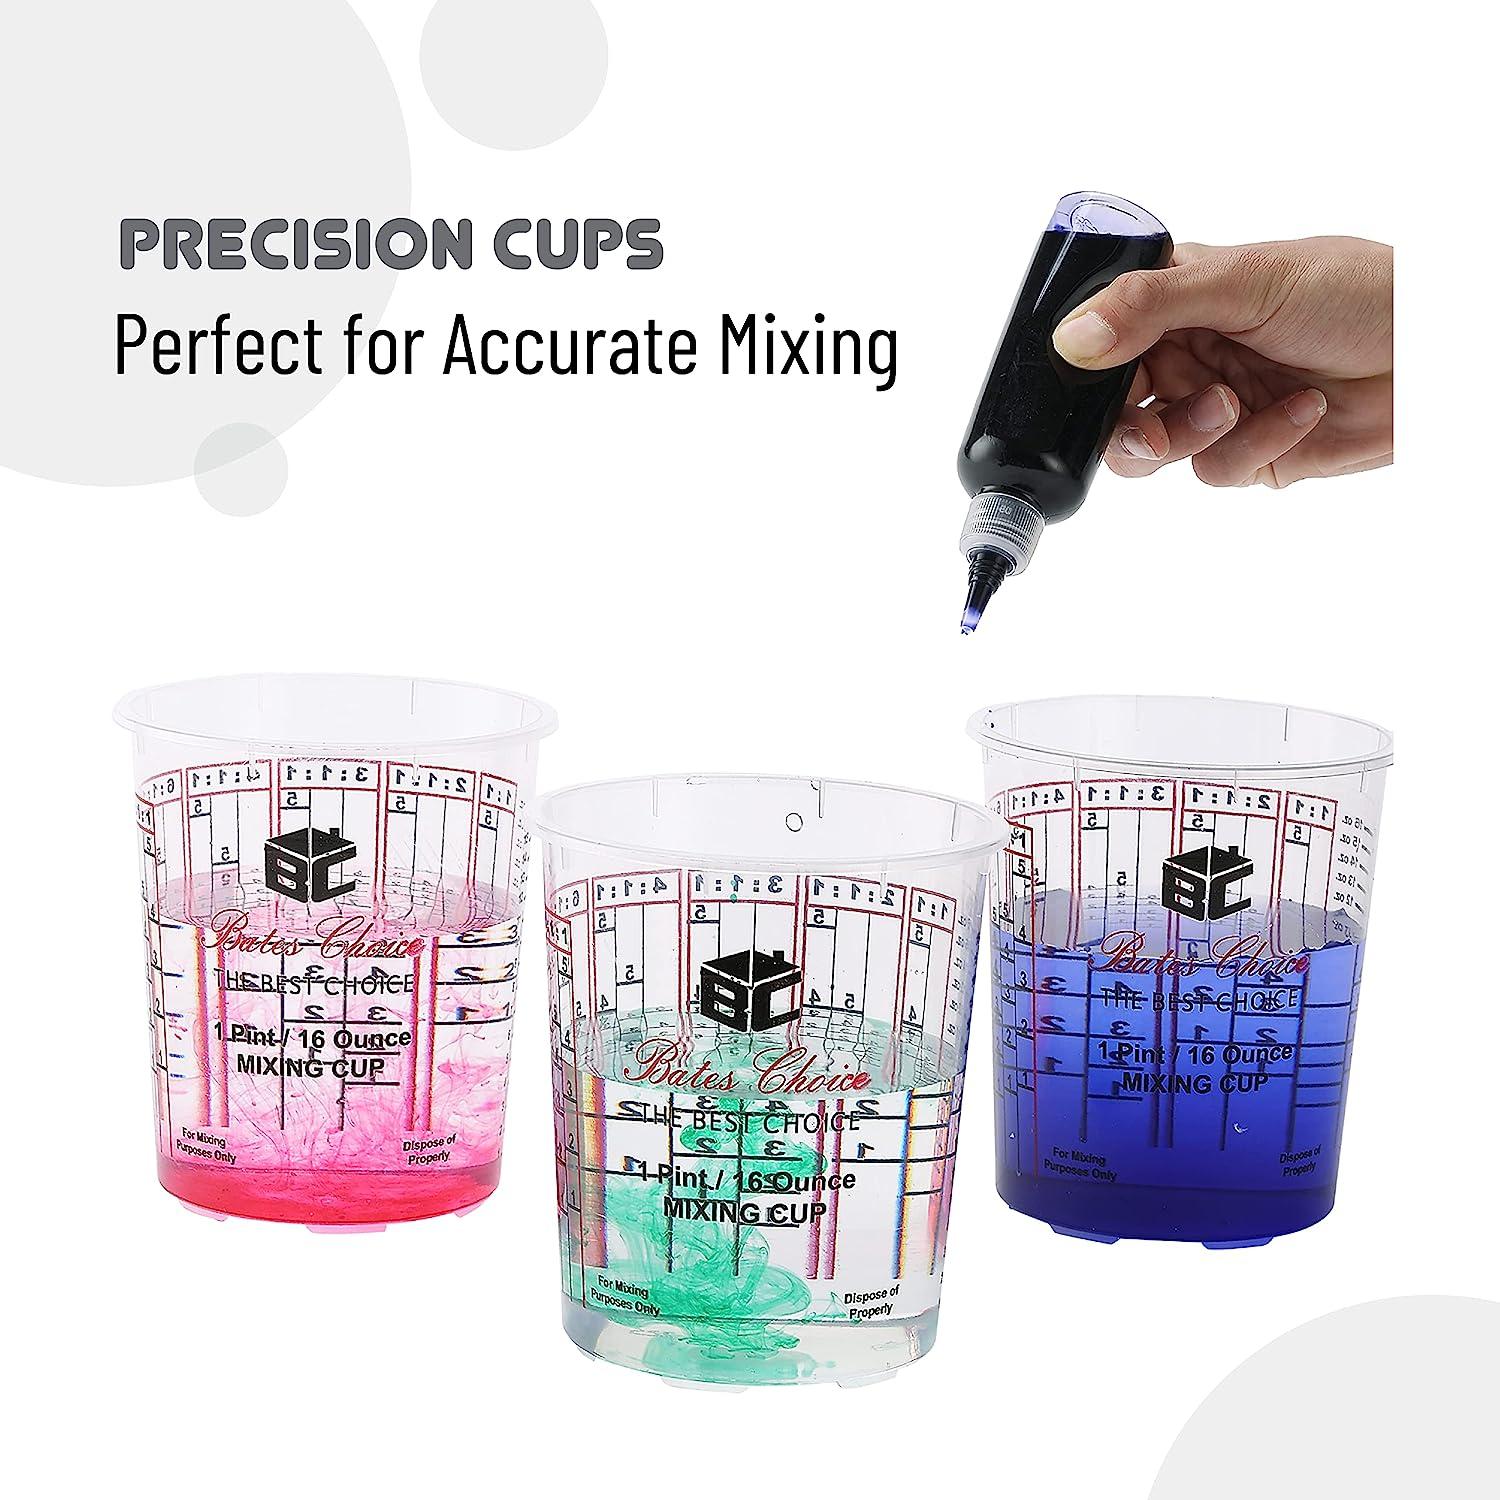 Liquid Measuring Mixing Cups for Epoxy Resin, Multipurpose Mixing